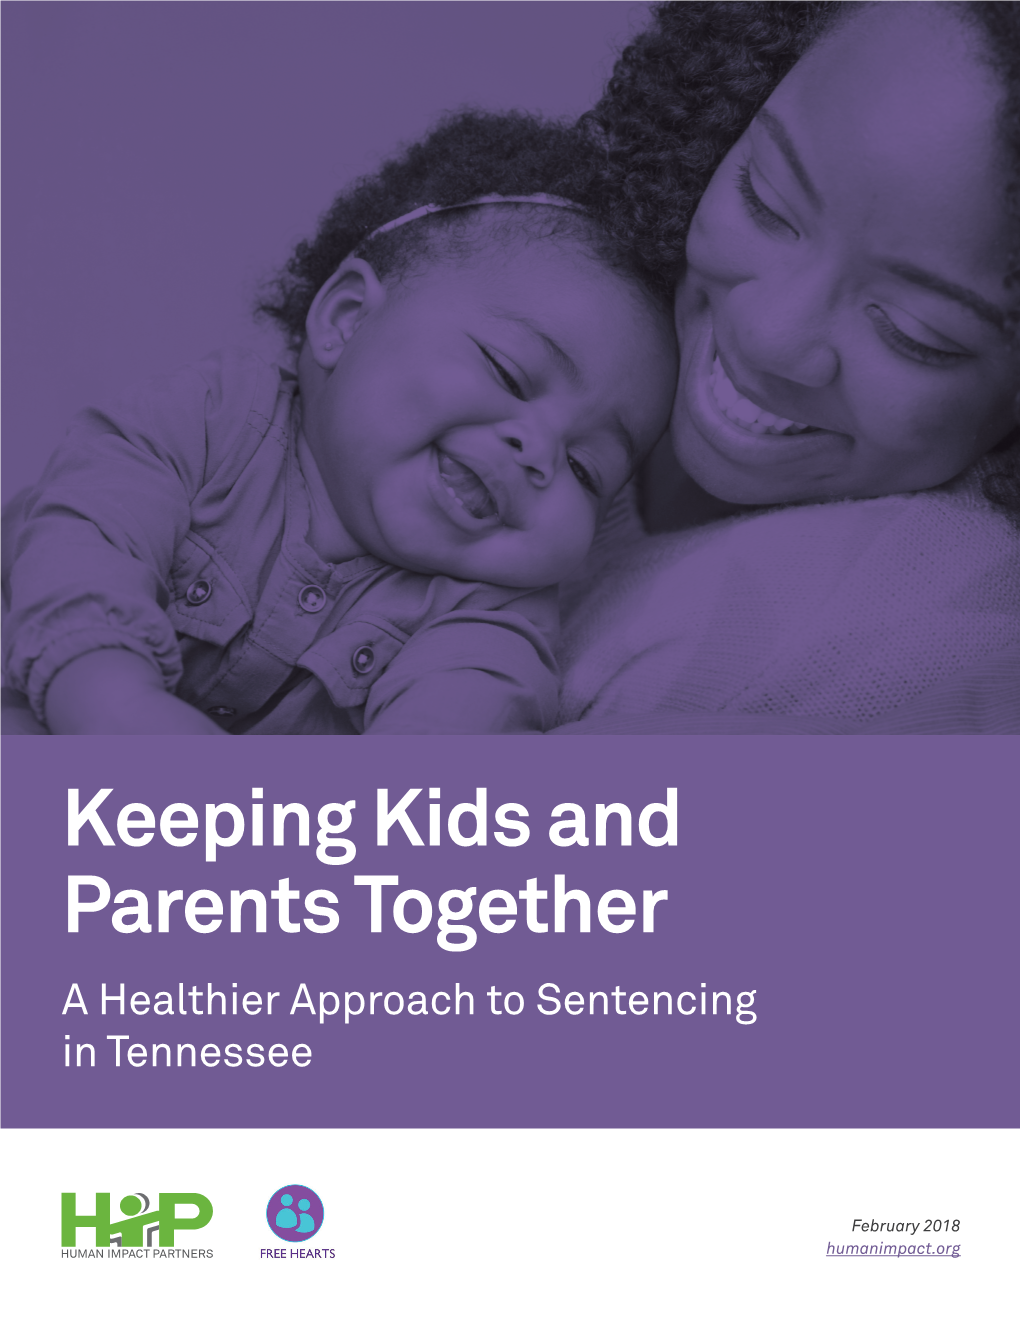 Keeping Kids and Parents Together a Healthier Approach to Sentencing in Tennessee